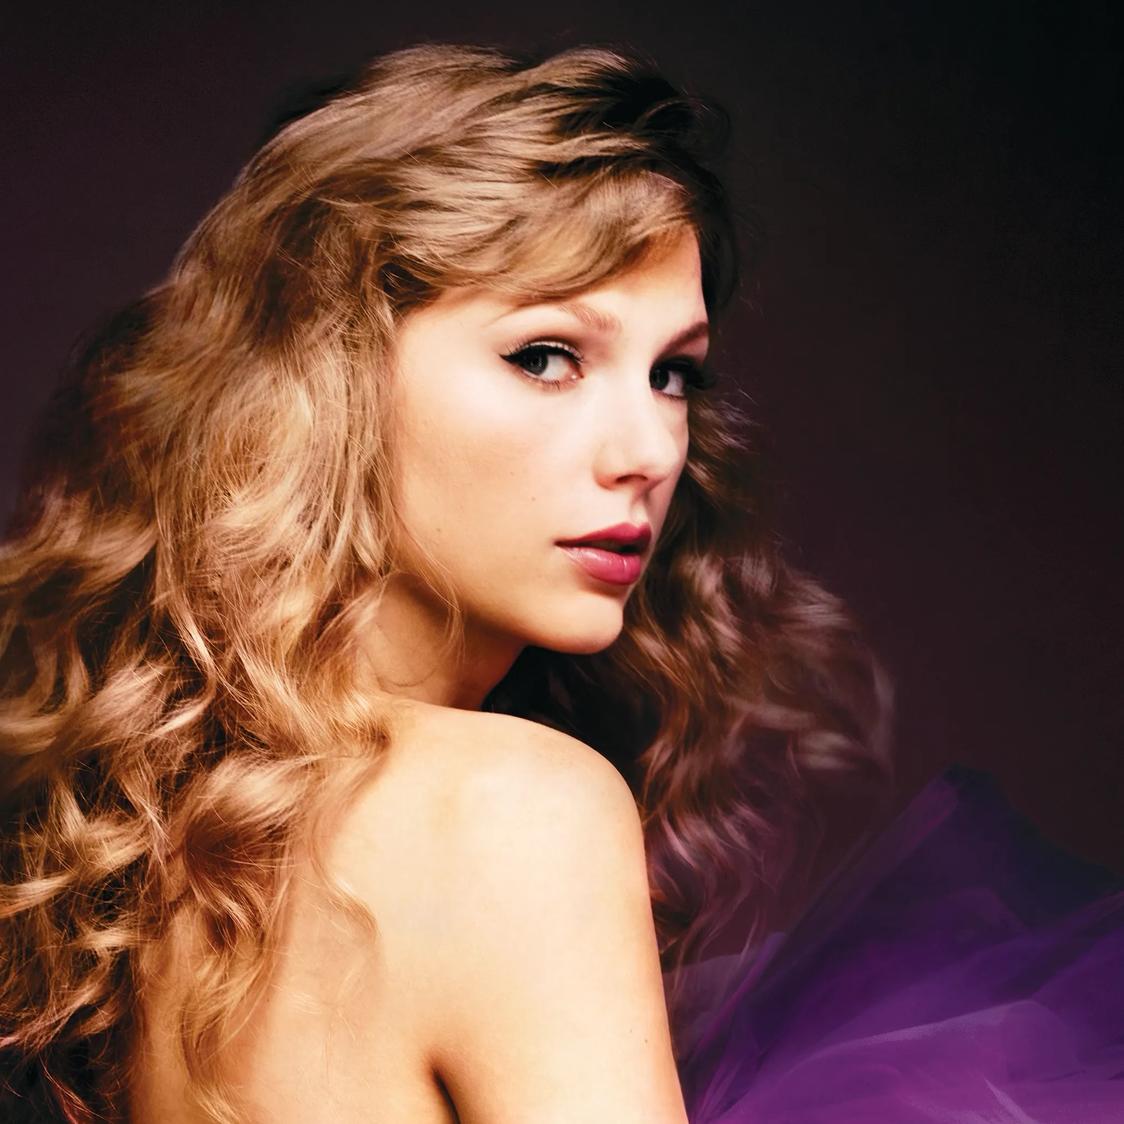 Taylorswift's images